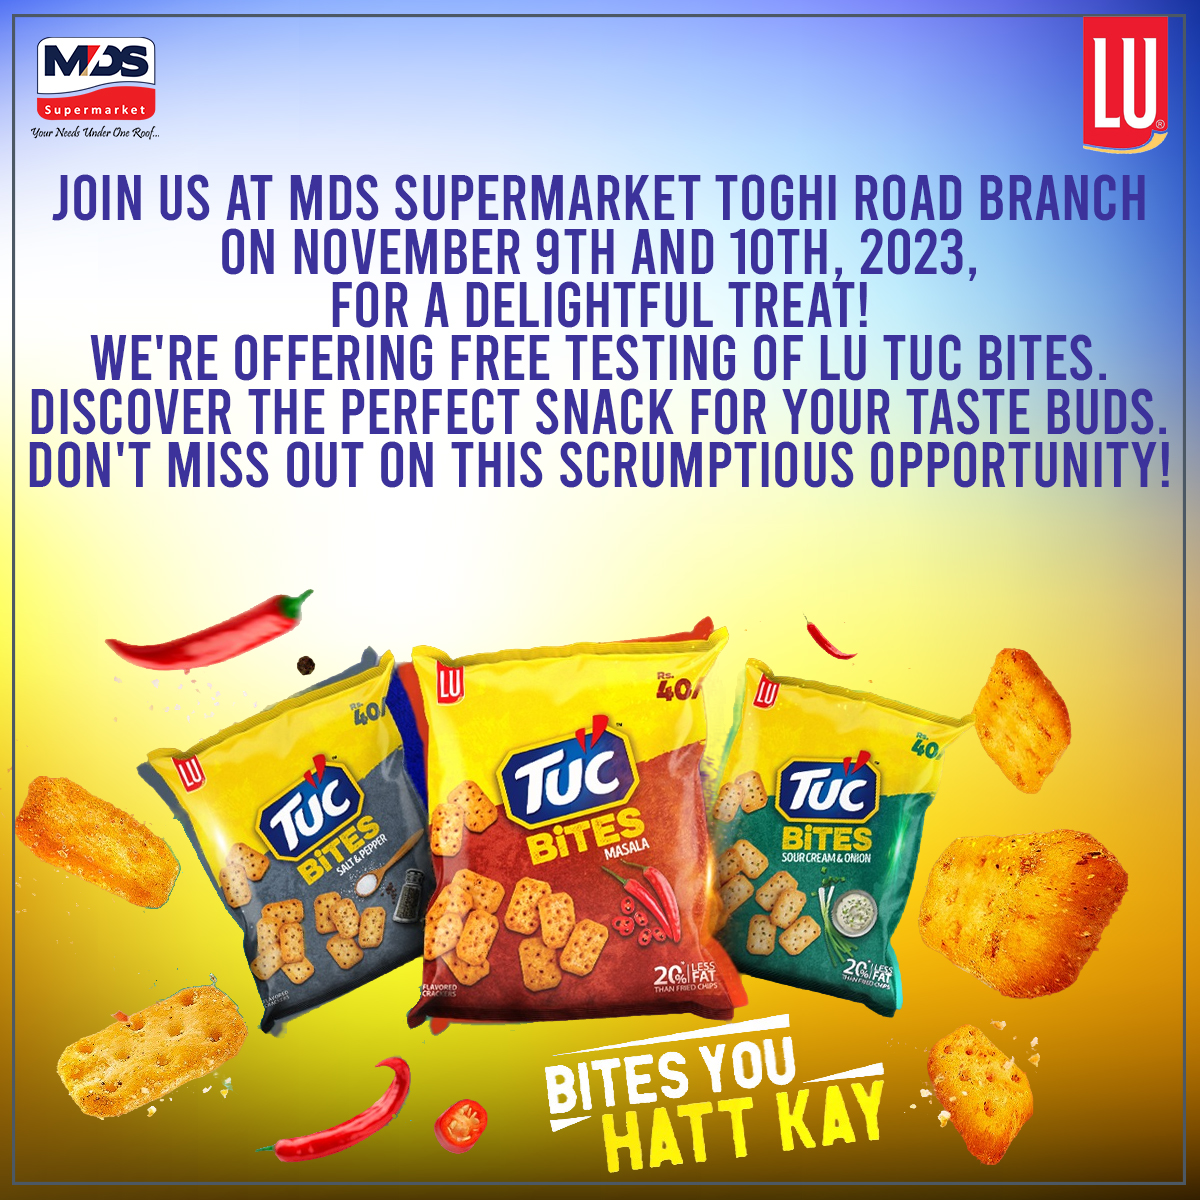 📅 Date: November 9th & 10th, 2023
📍 Location: MDS Supermarket Toghi Road Branch

Don't miss this tasty opportunity! See you there! 😃

#MDSFreeTasting #LUTucBites #TastyTreats #MDSupermarket #FoodieDelights #SnackTime #FoodLovers #TasteTheGoodness #FreeTasting #9Nov2023